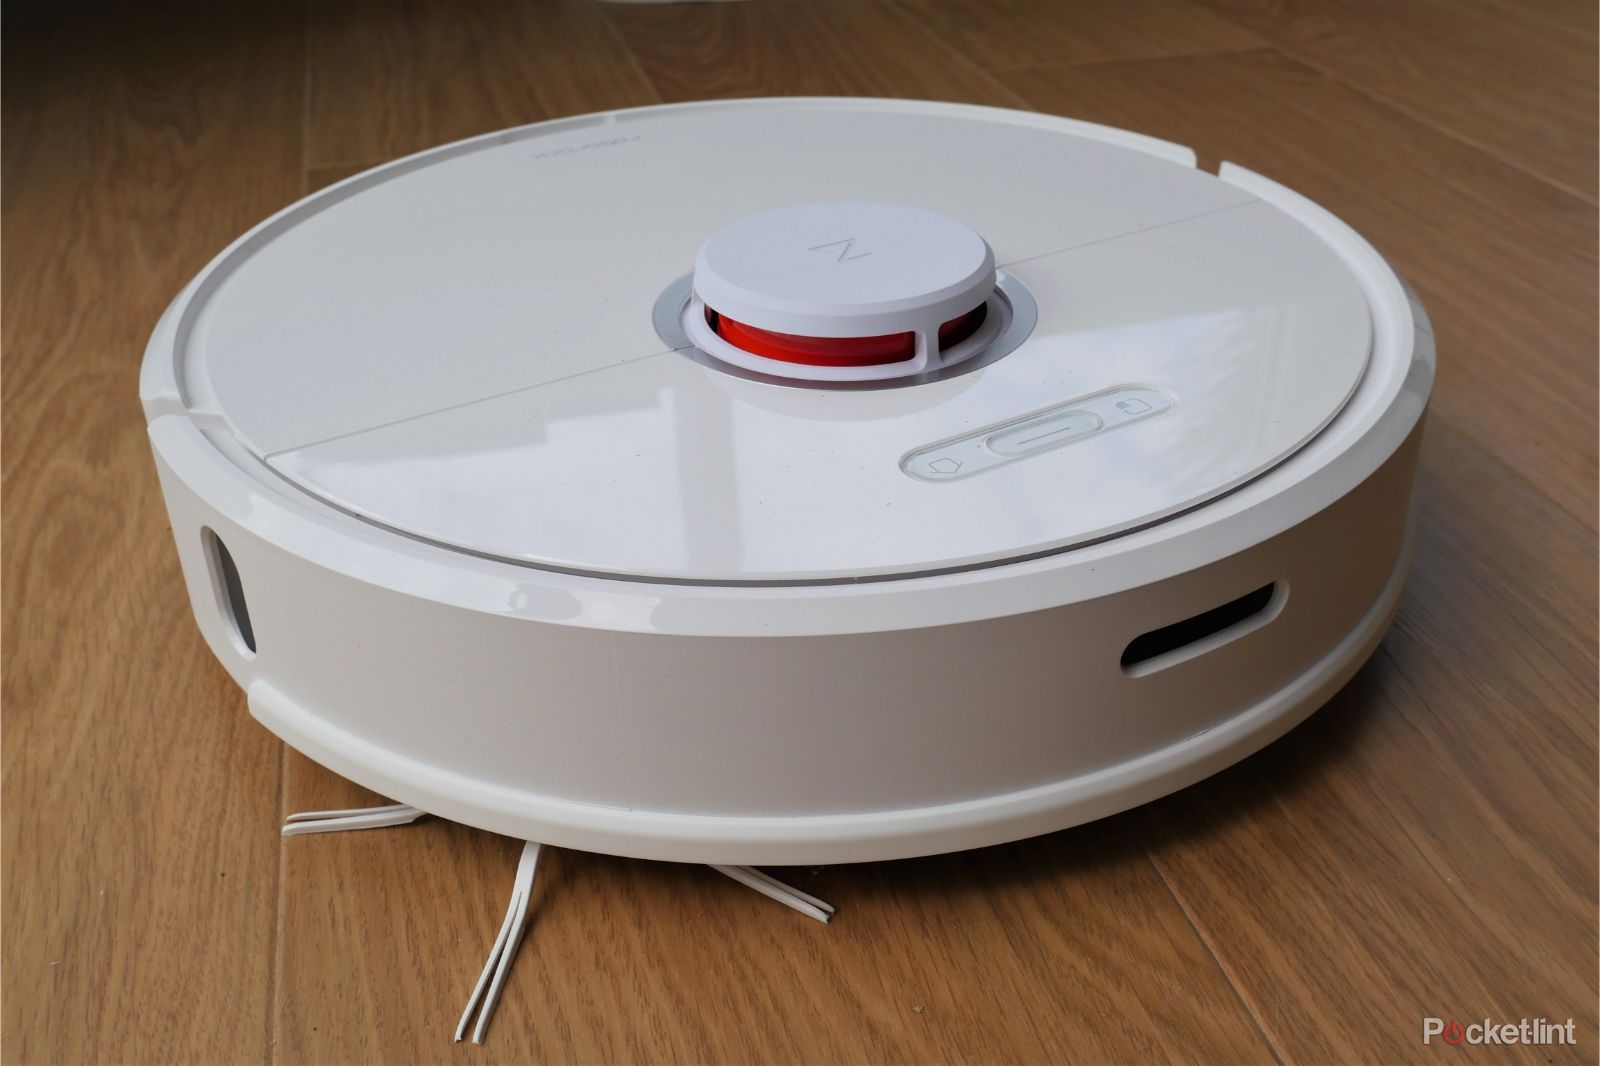 We Spent 2 Weeks With The Robovac S6 Here Are 6 Reasons We Love It image 1